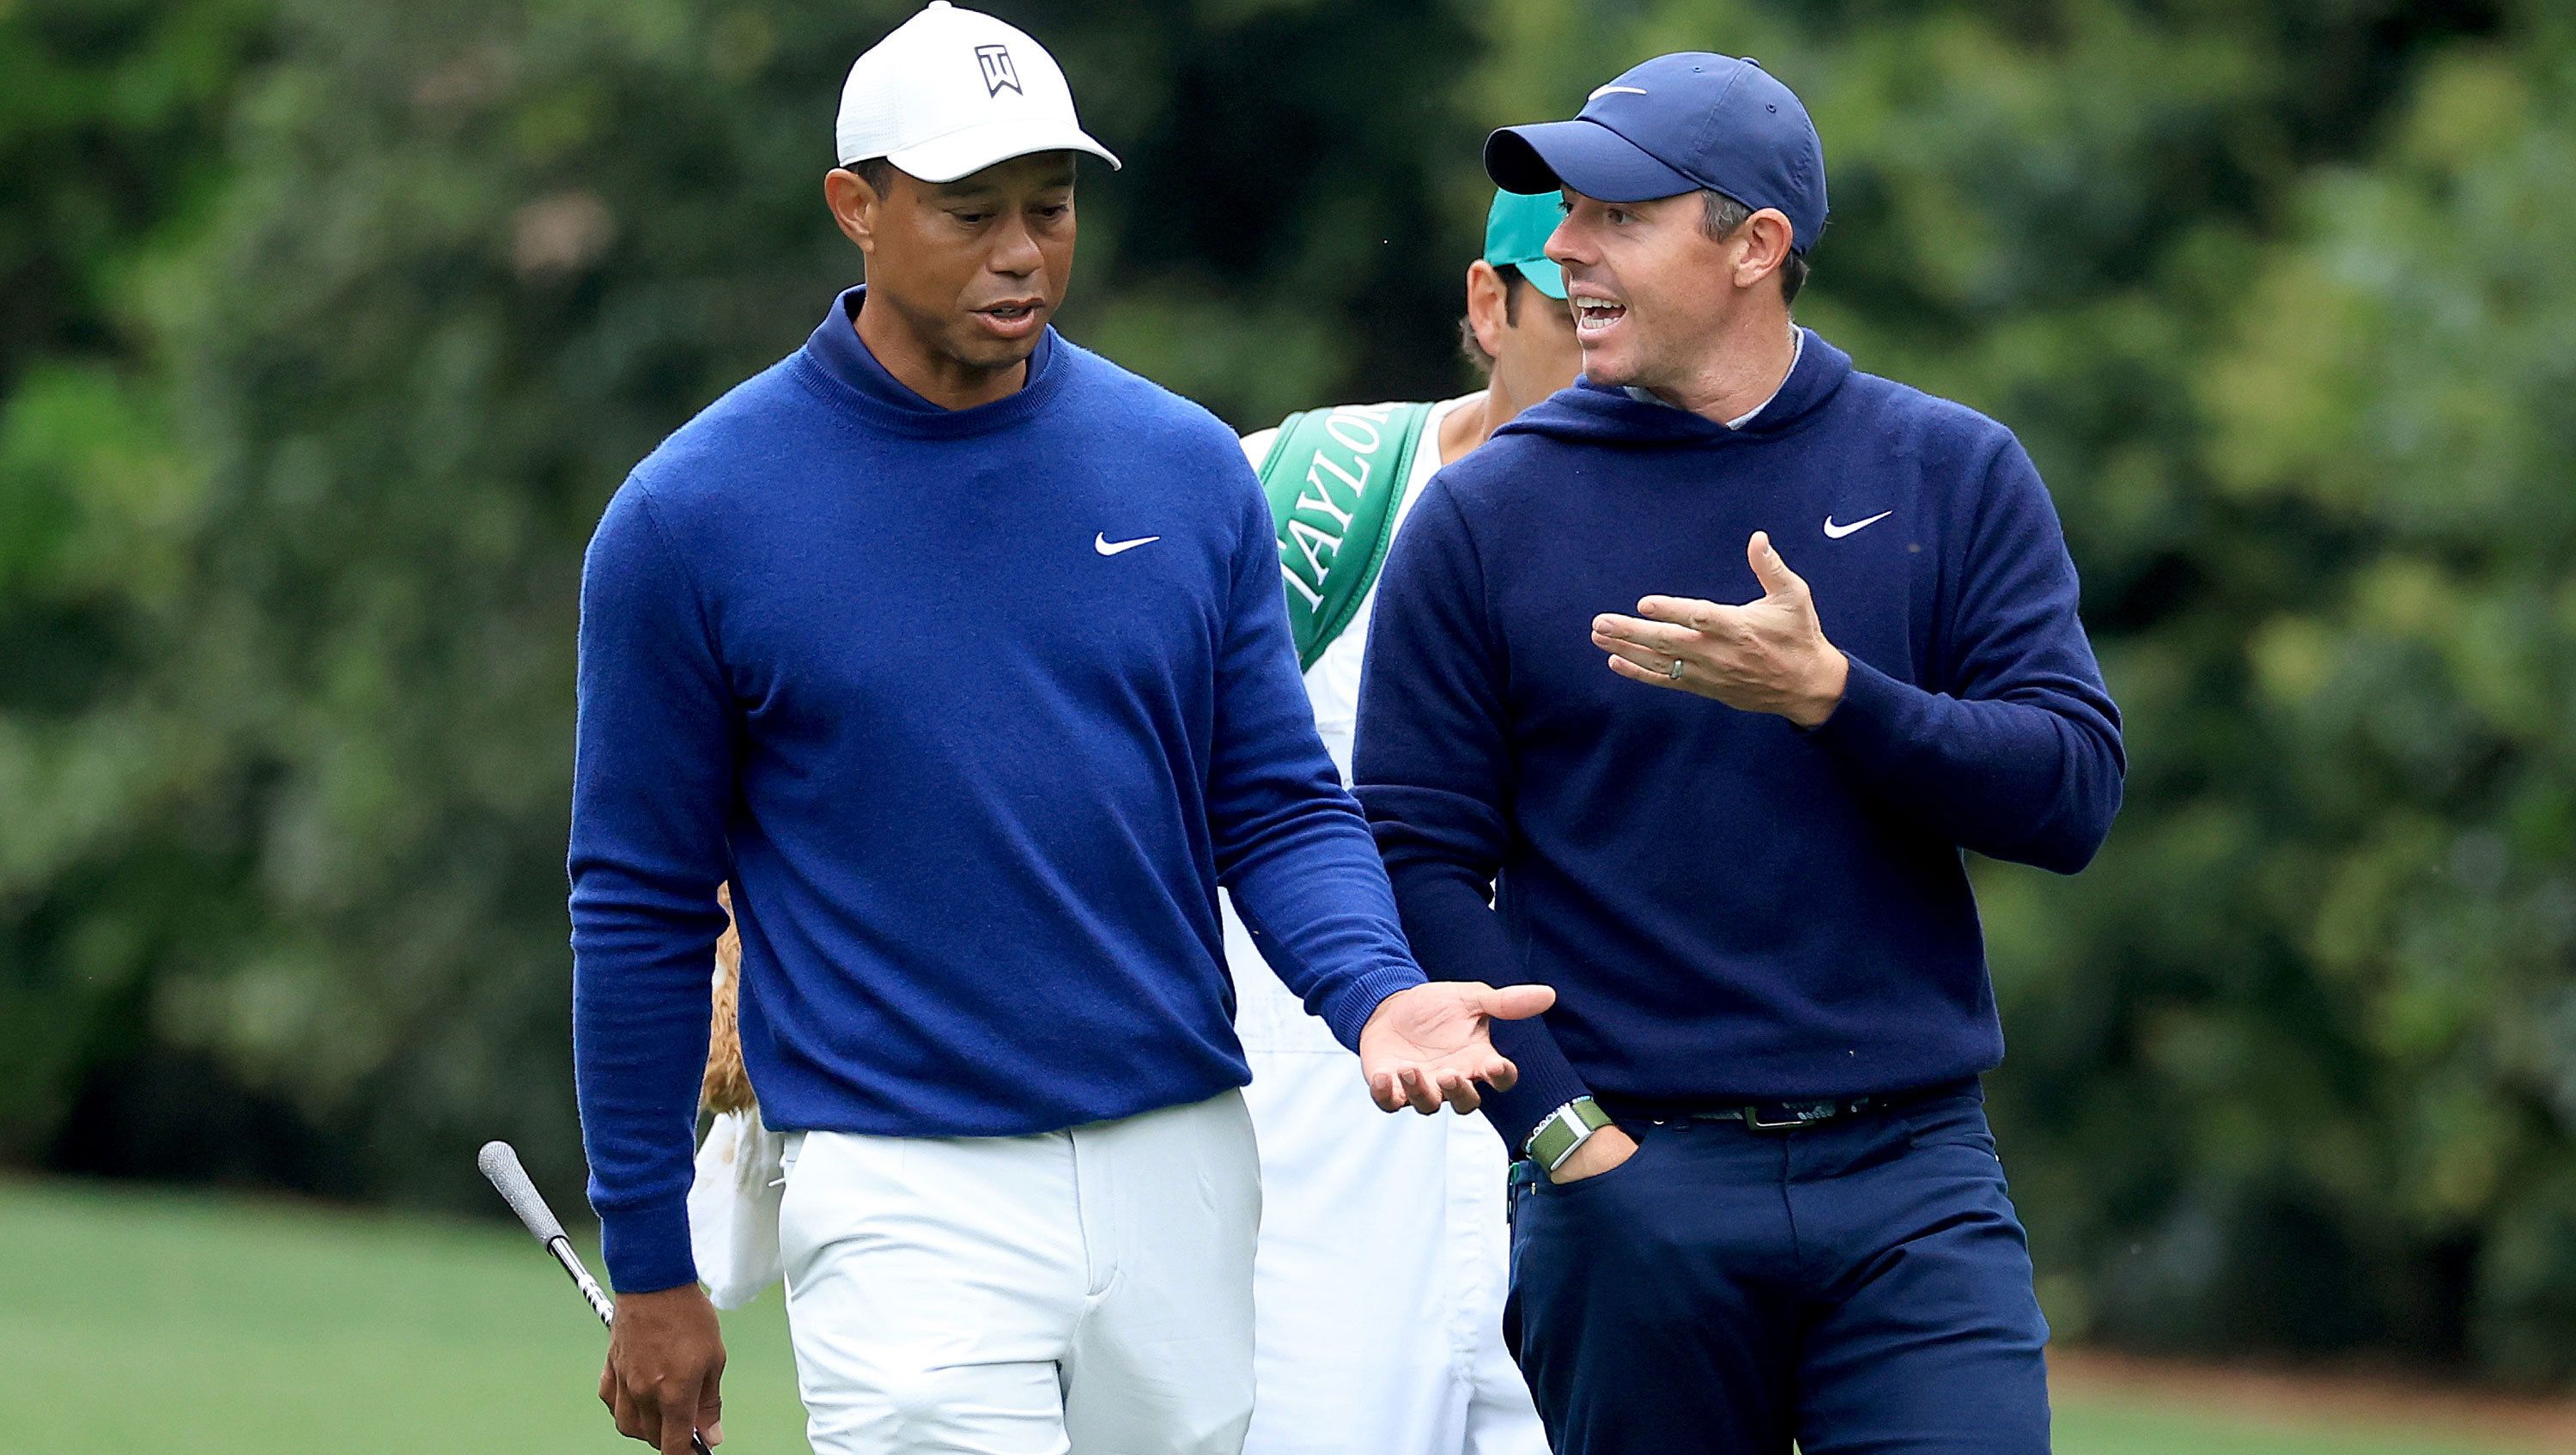 Rory McIlroy and Tiger Woods of the United States walk together on the 11th hole during a practice round prior to the 2023 Masters Tournament at Augusta National. 